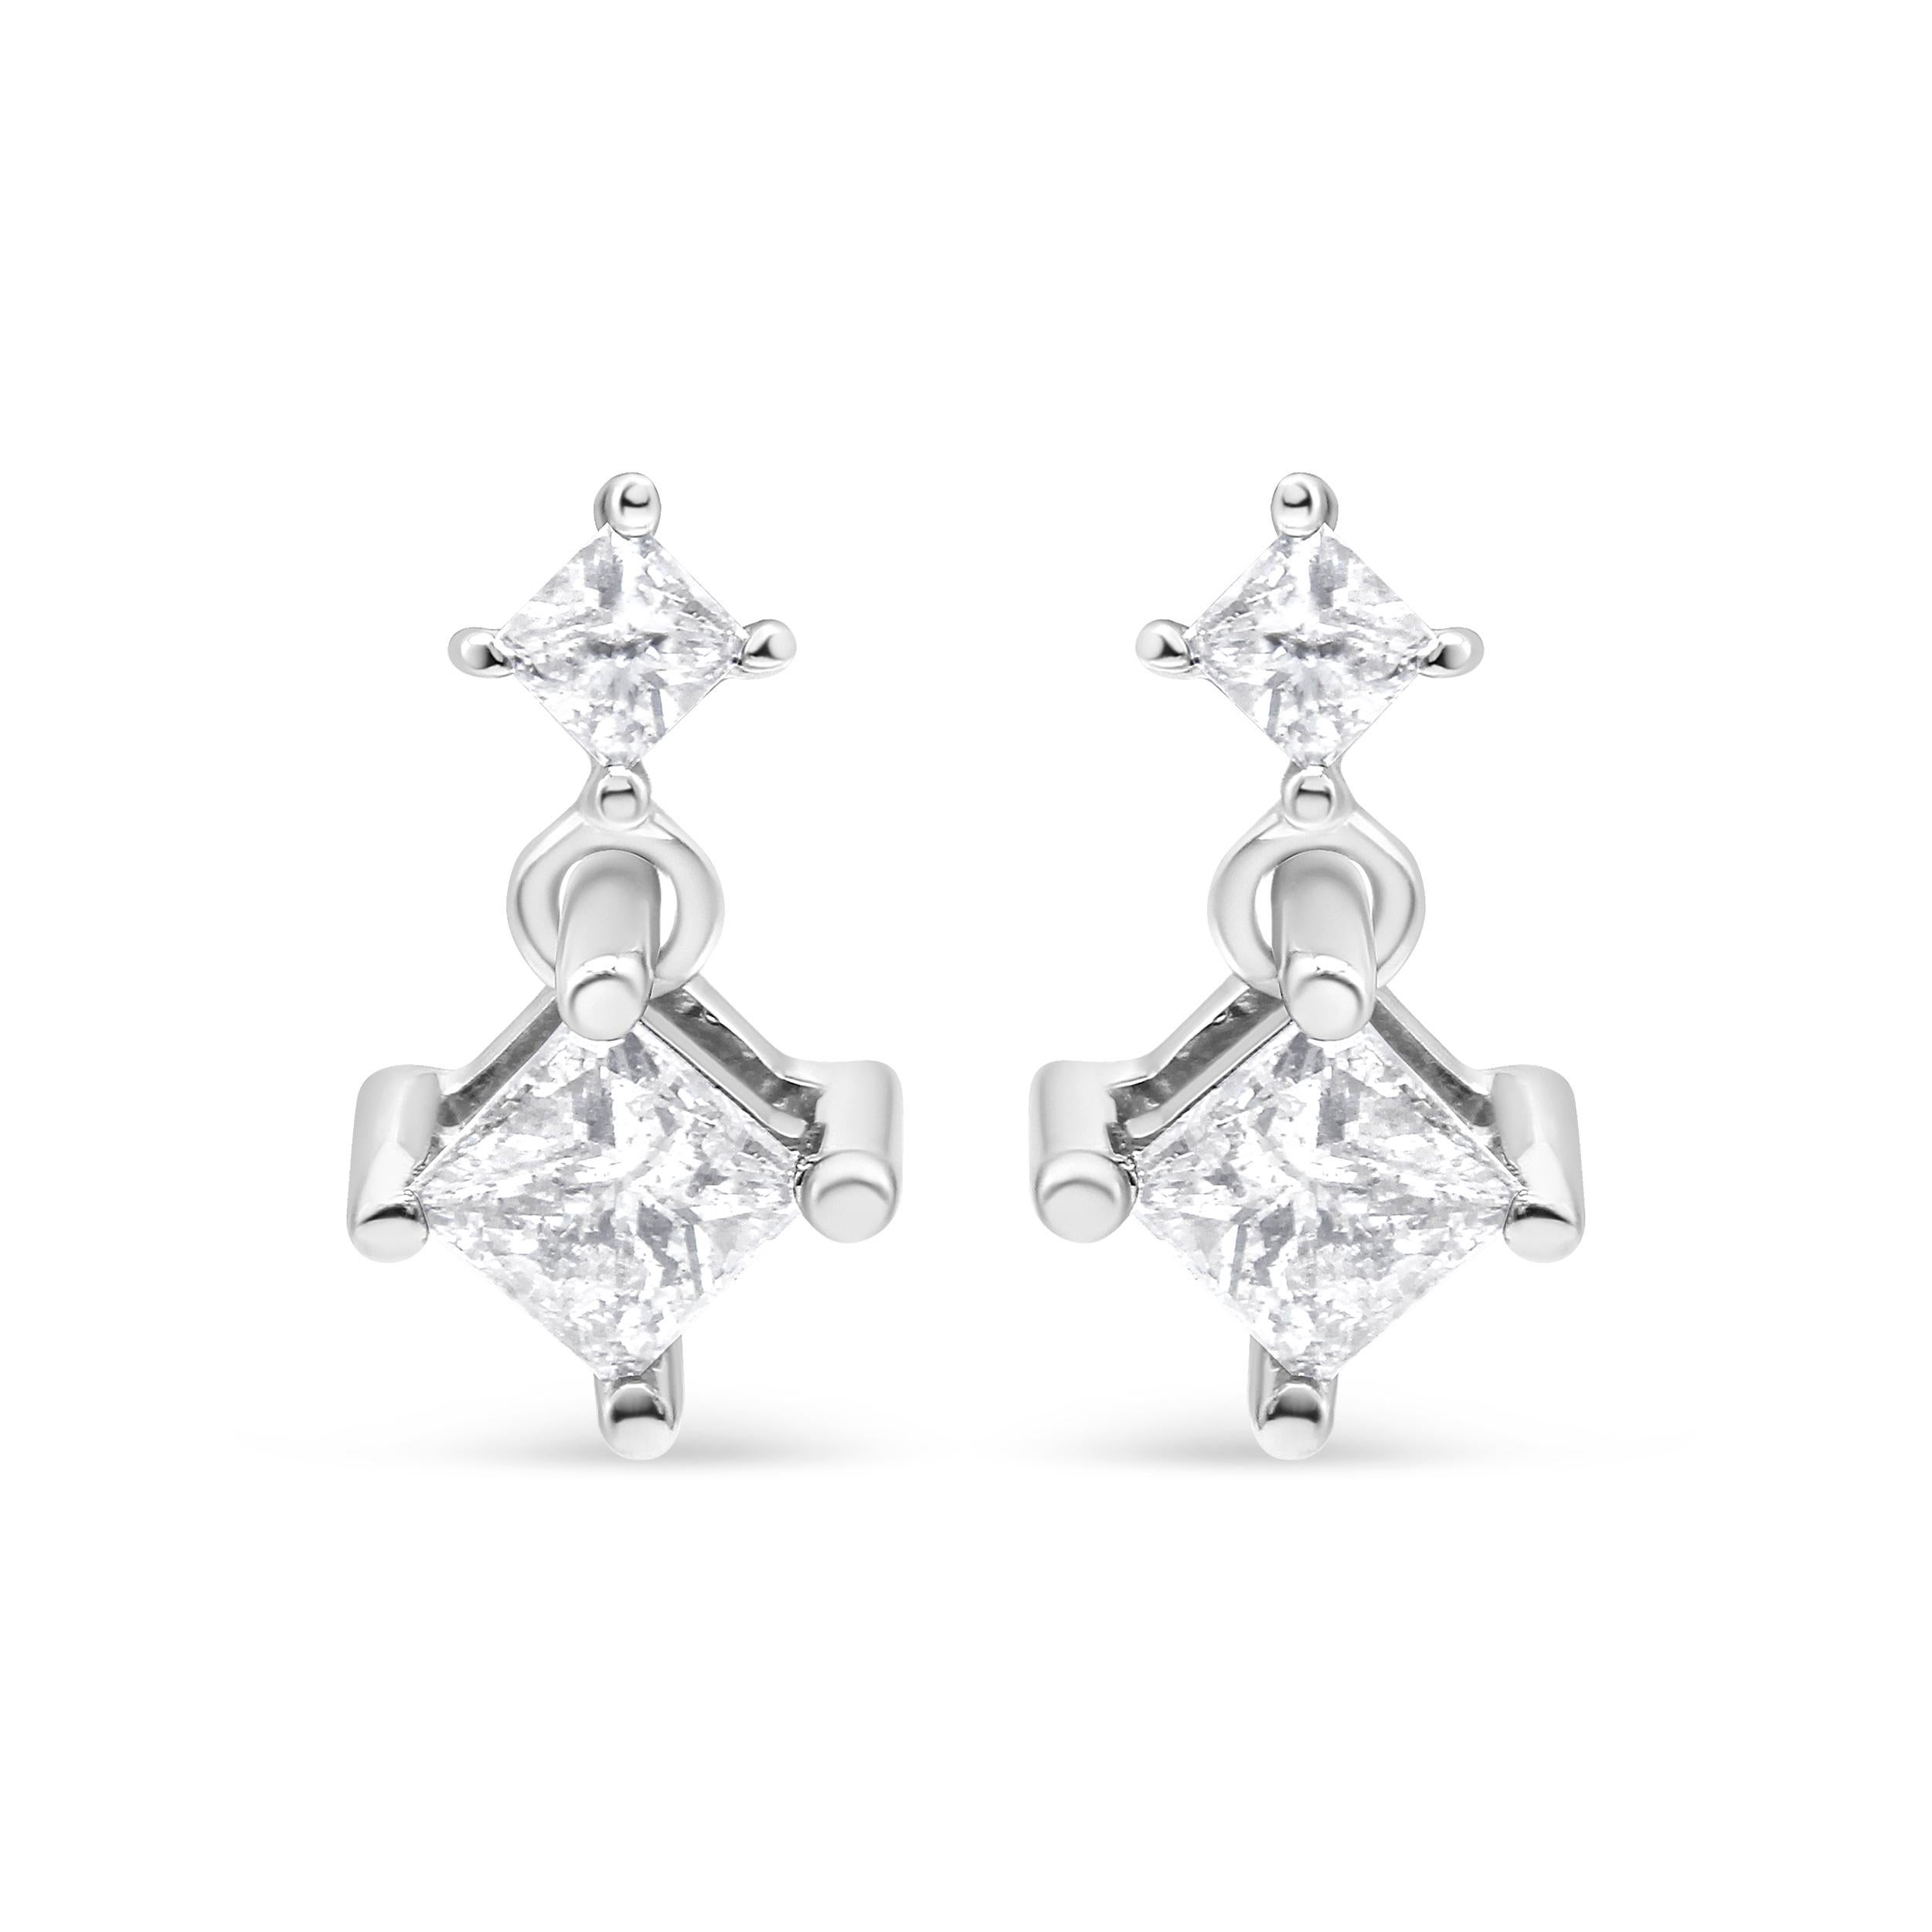 These lovely 14k white gold dangle earrings feature 1 ct. of diamonds. Two natural, princess-cut diamonds sit on top of each other. The design dangles from a push back finding and adds the perfect amount of sparkle to your everyday wear.

'Video